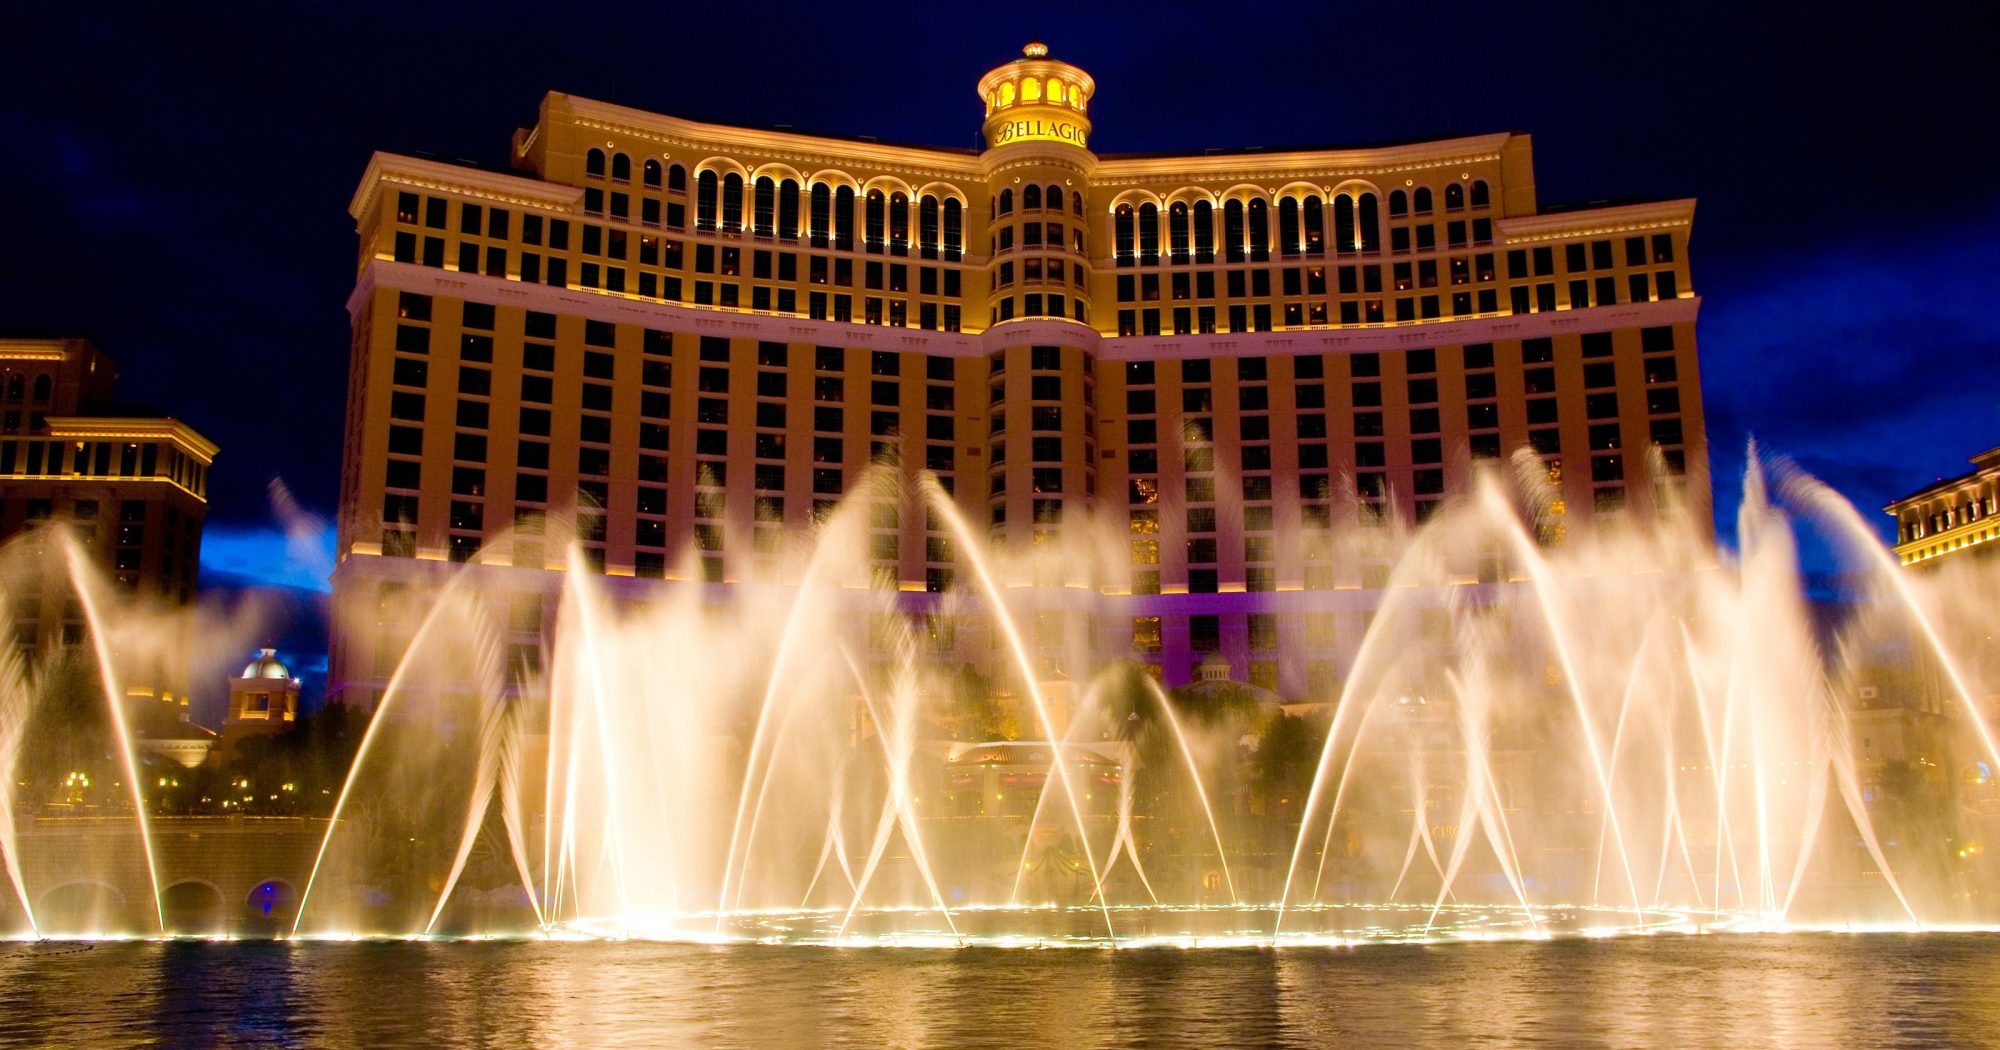 Enjoy a Trip to Vegas in the Beautiful Bellagio Resort Using Hyatt Points. You Can Even Pay With Points + Cash Option Now.